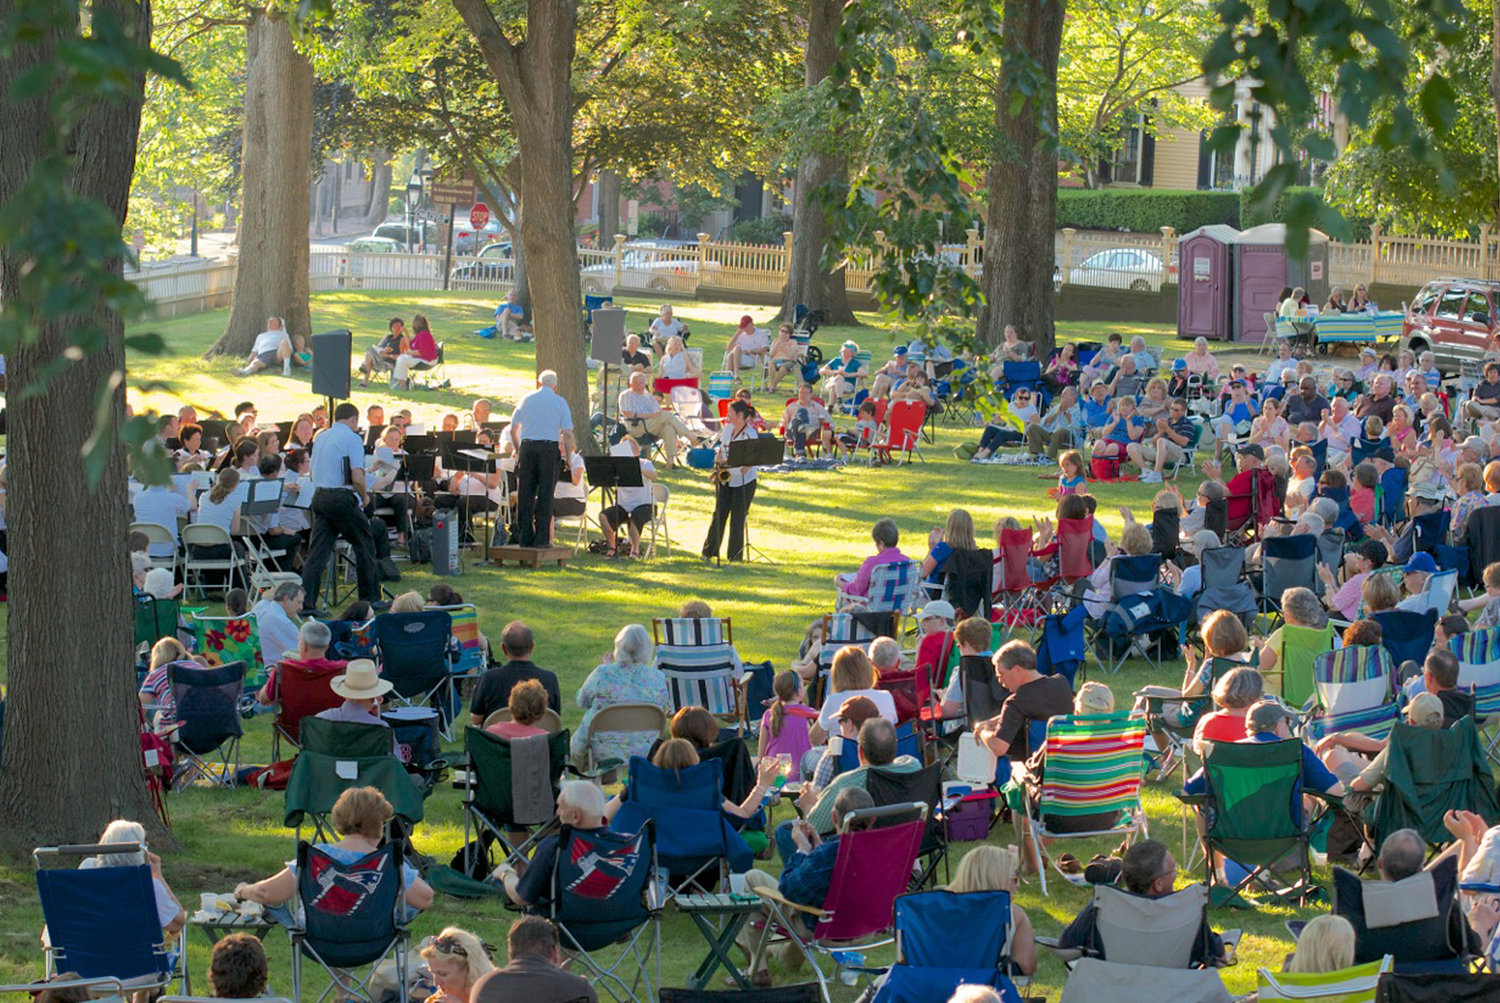 The John Brown House museum lawn provides the setting for the popular concert series